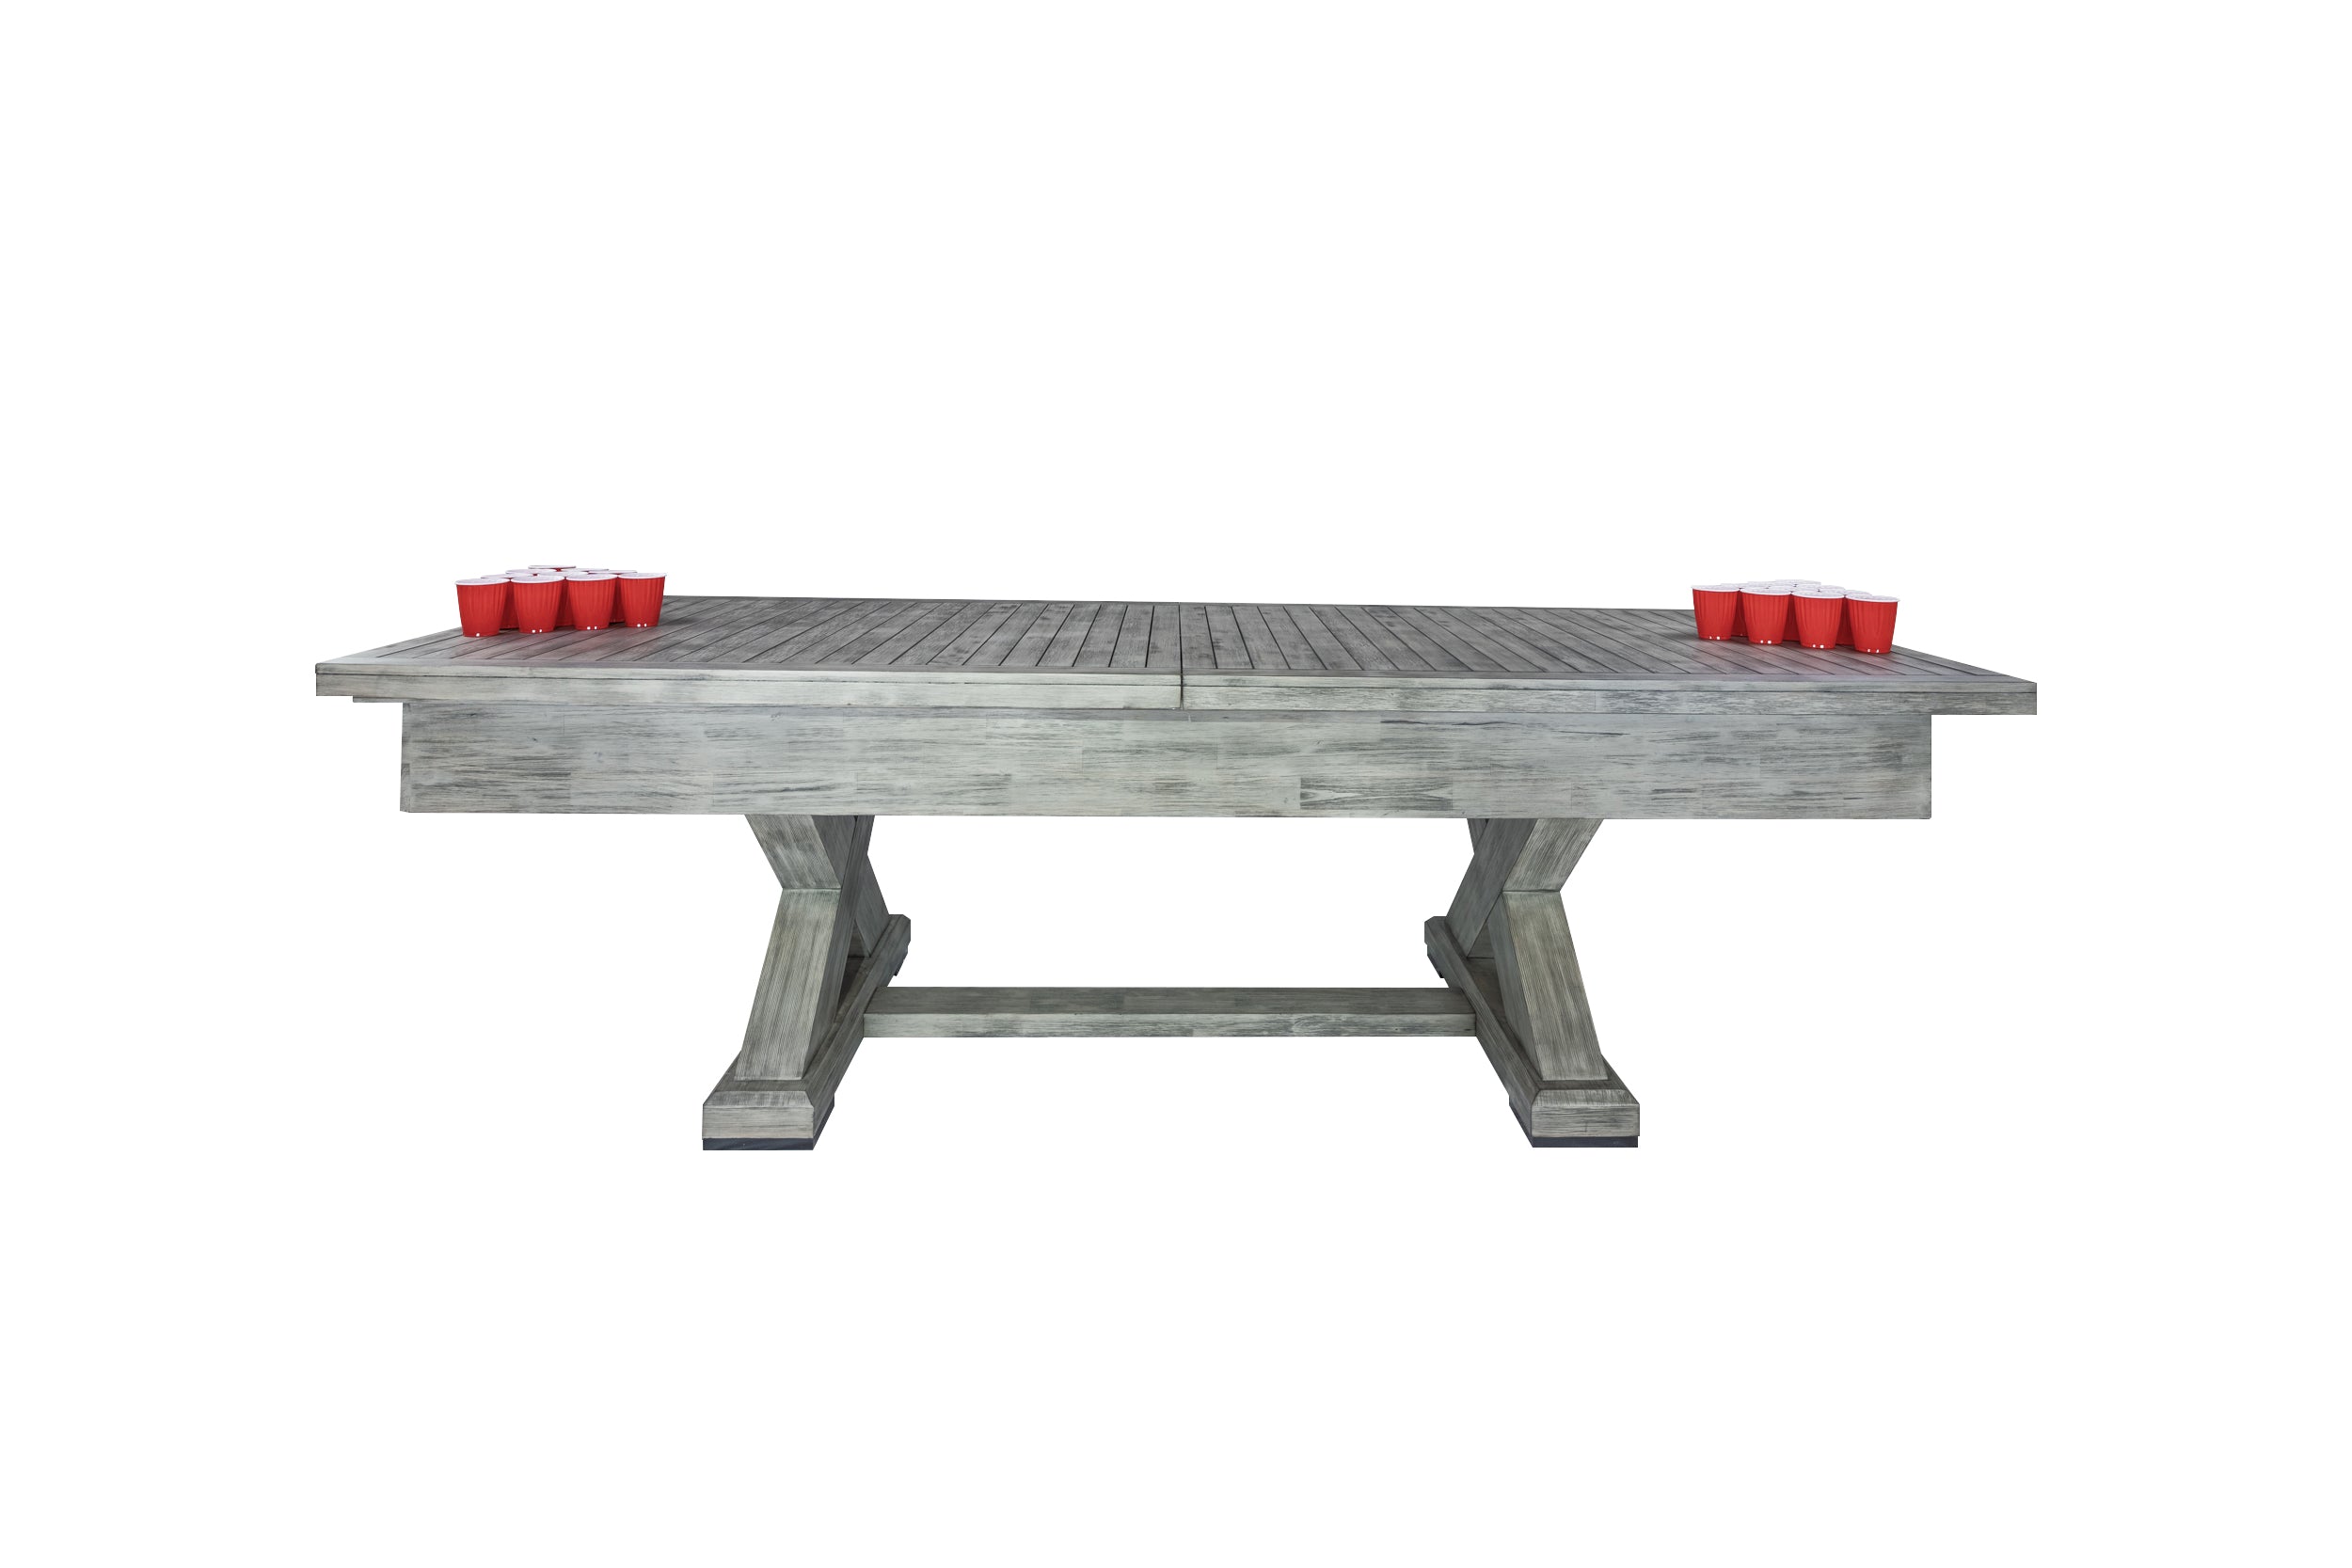 Legacy Billiards 9 Foot Shuffleboard Outdoor Dining Top in Ash Grey Finish - Side View with Beer Pong